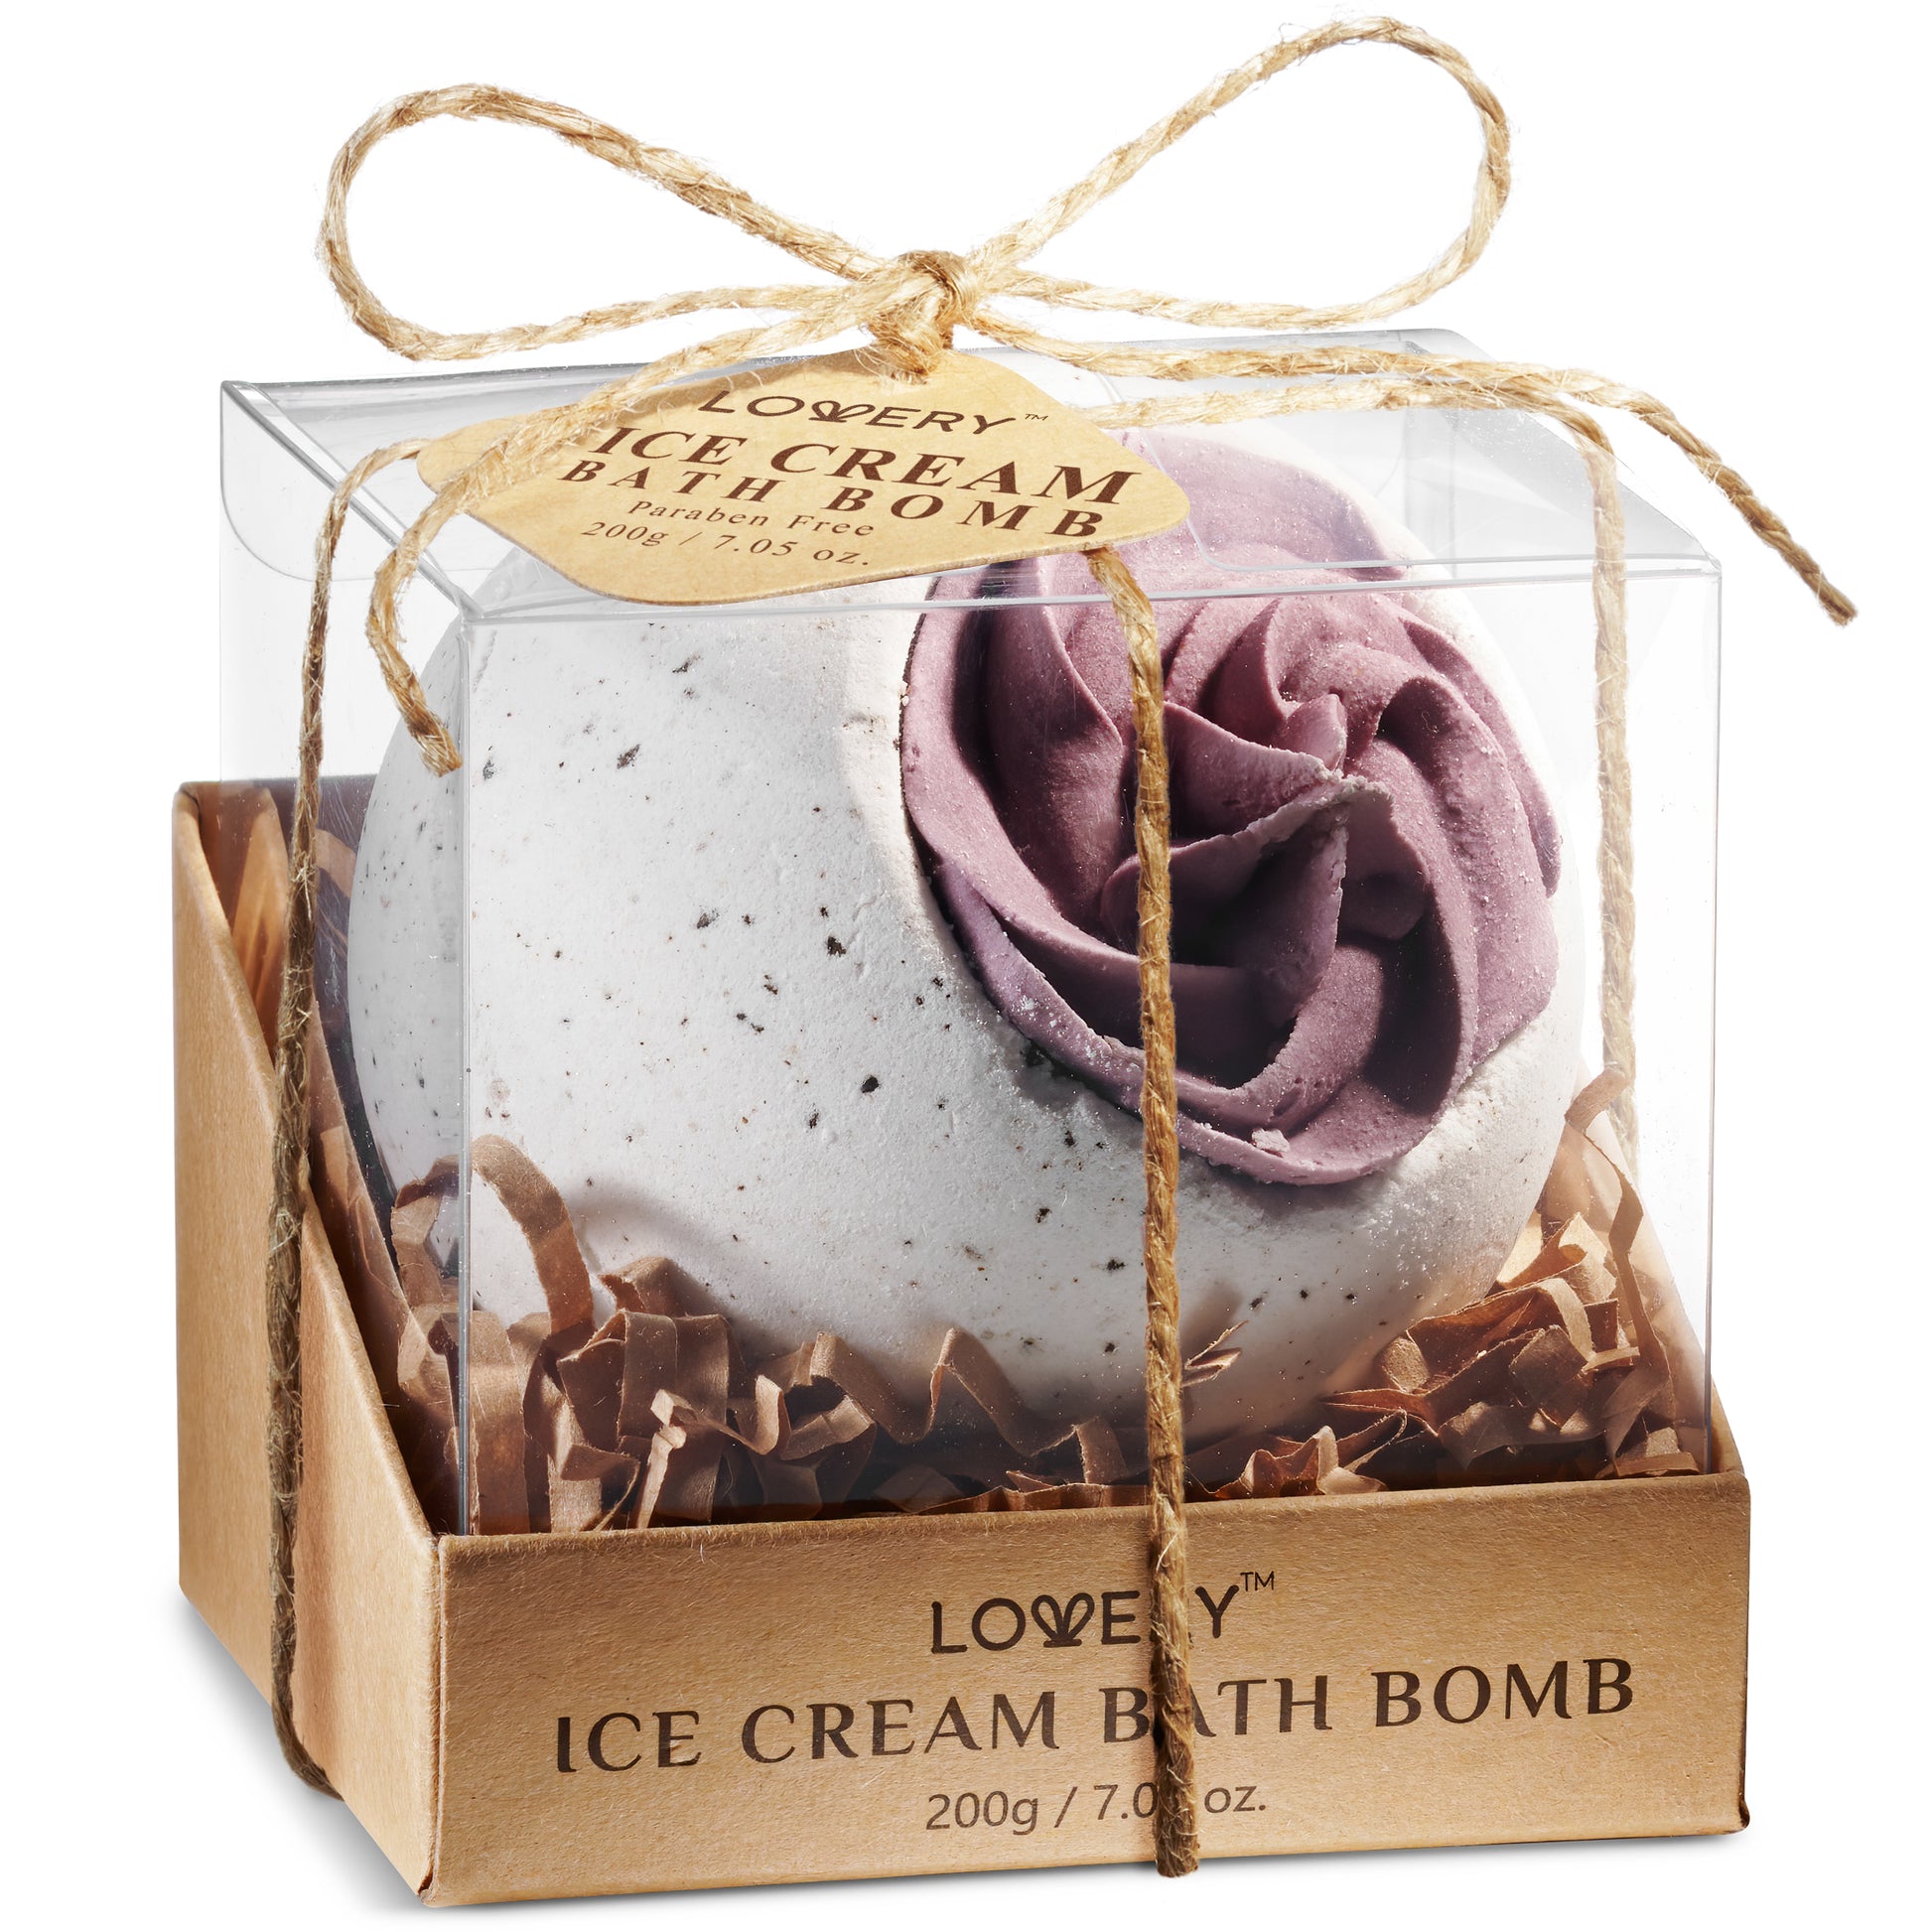  lovery ice cream bath bomb, ice cream bath bomb, Child-Friendly Ice Cream Bath Bomb, Fizzy Spa Treat, 7oz Handmade Spa Ball for All Ages, Clean Formula for Kids and Adults, Luminous and Supple Skin for Everyone, Bubbly Home Spa Fun for the Family, Nourishing Bath Essentials Suitable for Children, Vitamin E and Shea Butter Spa - Child-Safe, Cruelty-Free and Paraben-Free - Kid-Approved, Vegan-Friendly Bath Bombs for All Ages, Handmade Love for Family Self-Care